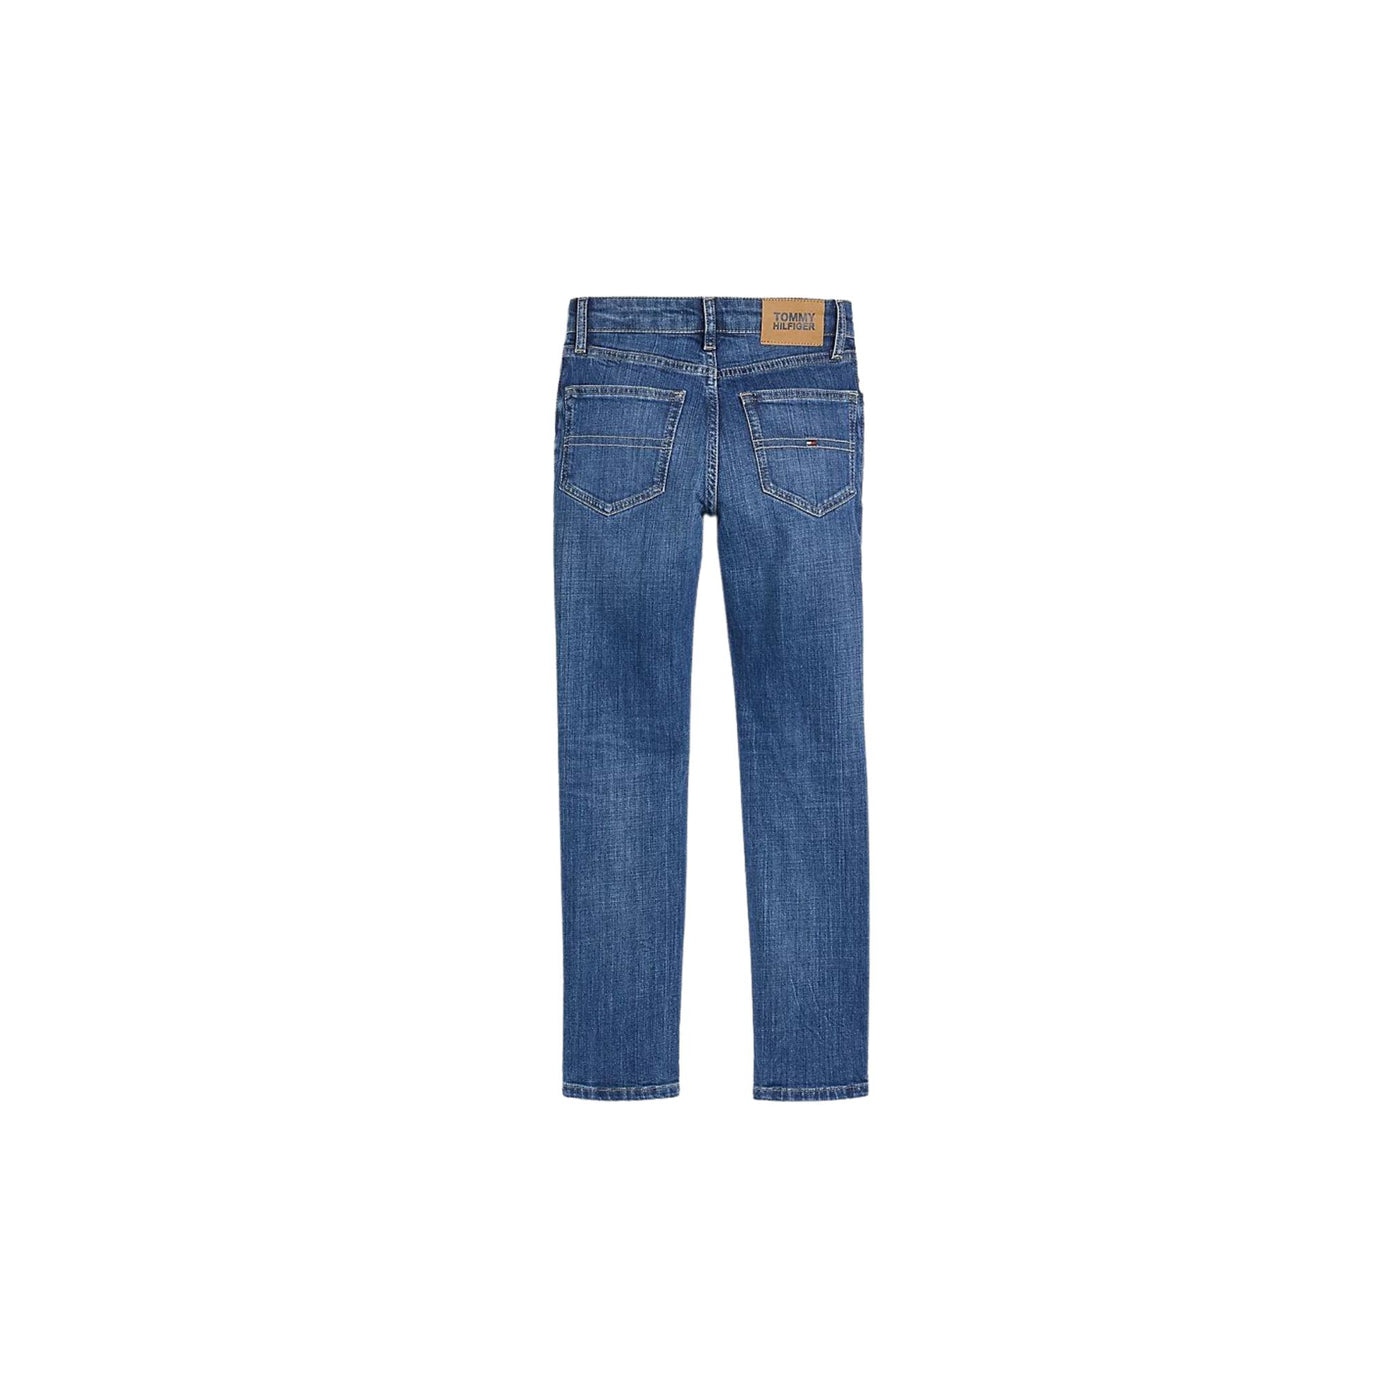 Faded slim fit boy jeans